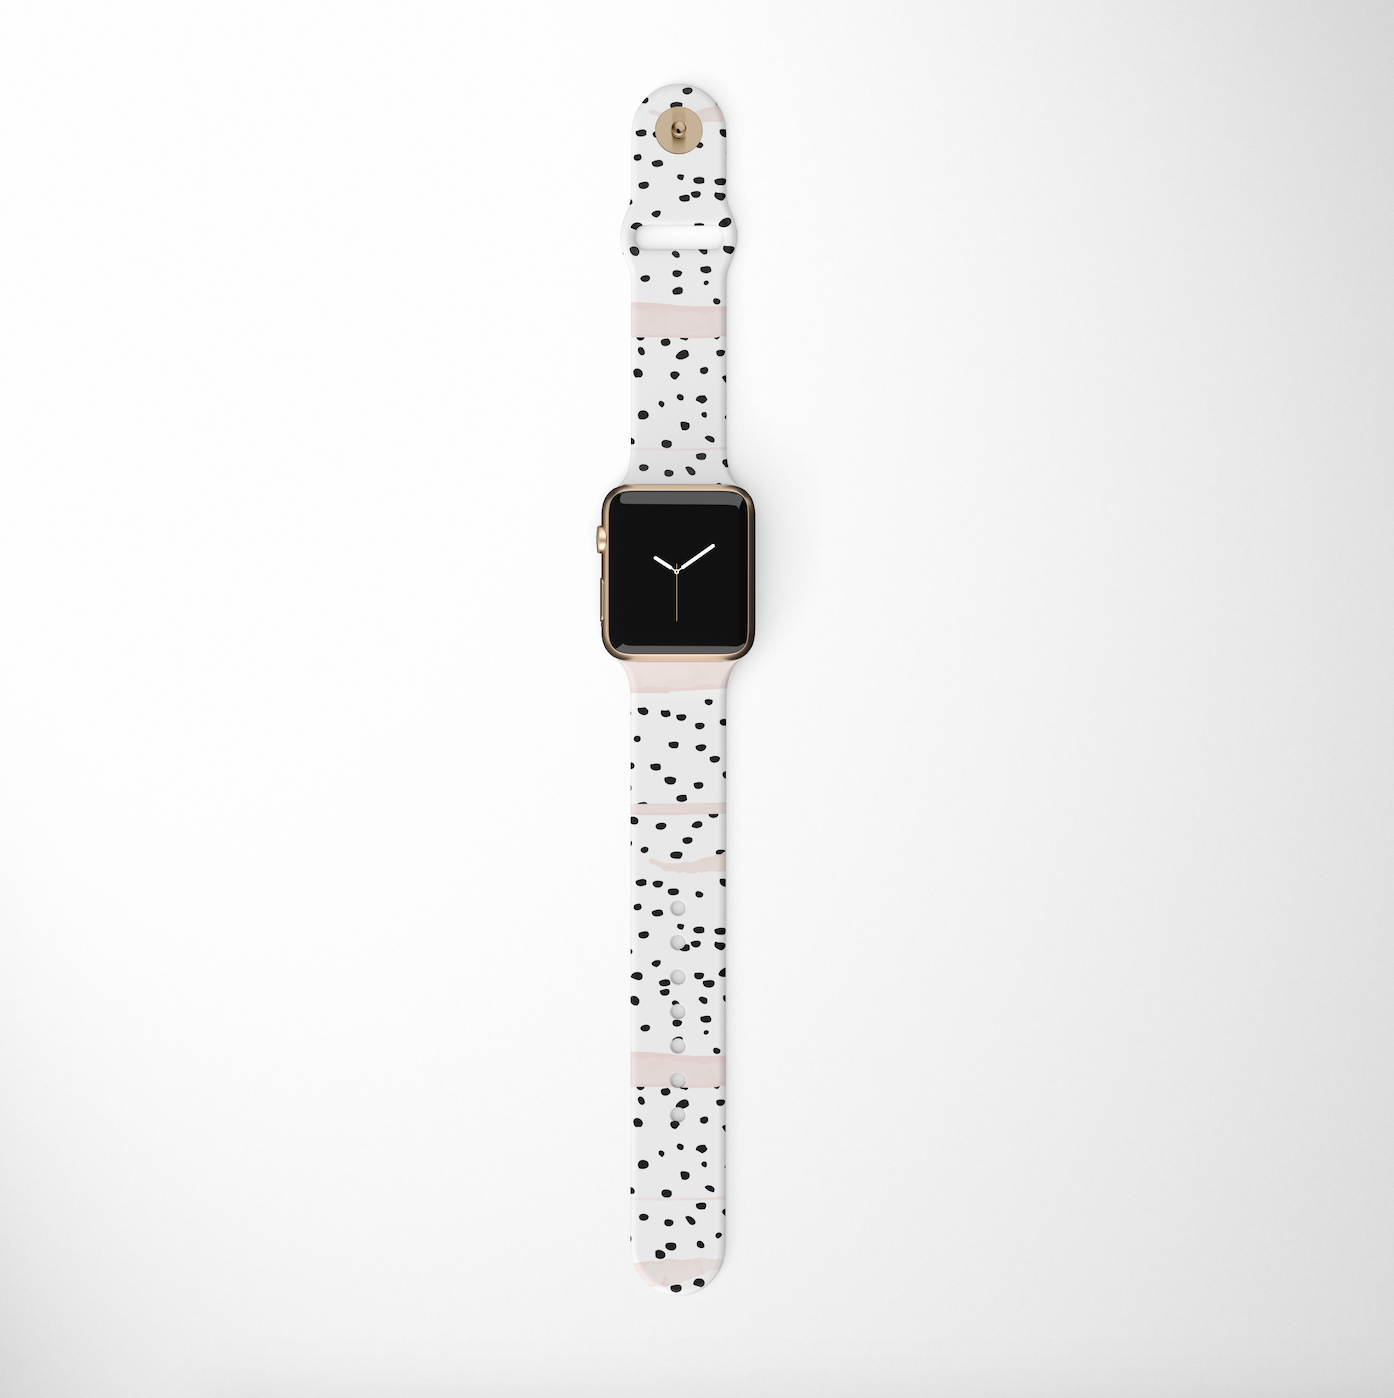 white PU leather iwatch strap for Series 1 2 3 4 5 white black spotted dog kd-dga Dalmatians Puppies Dogs Apple Watch Band 38 40 42 44 mm